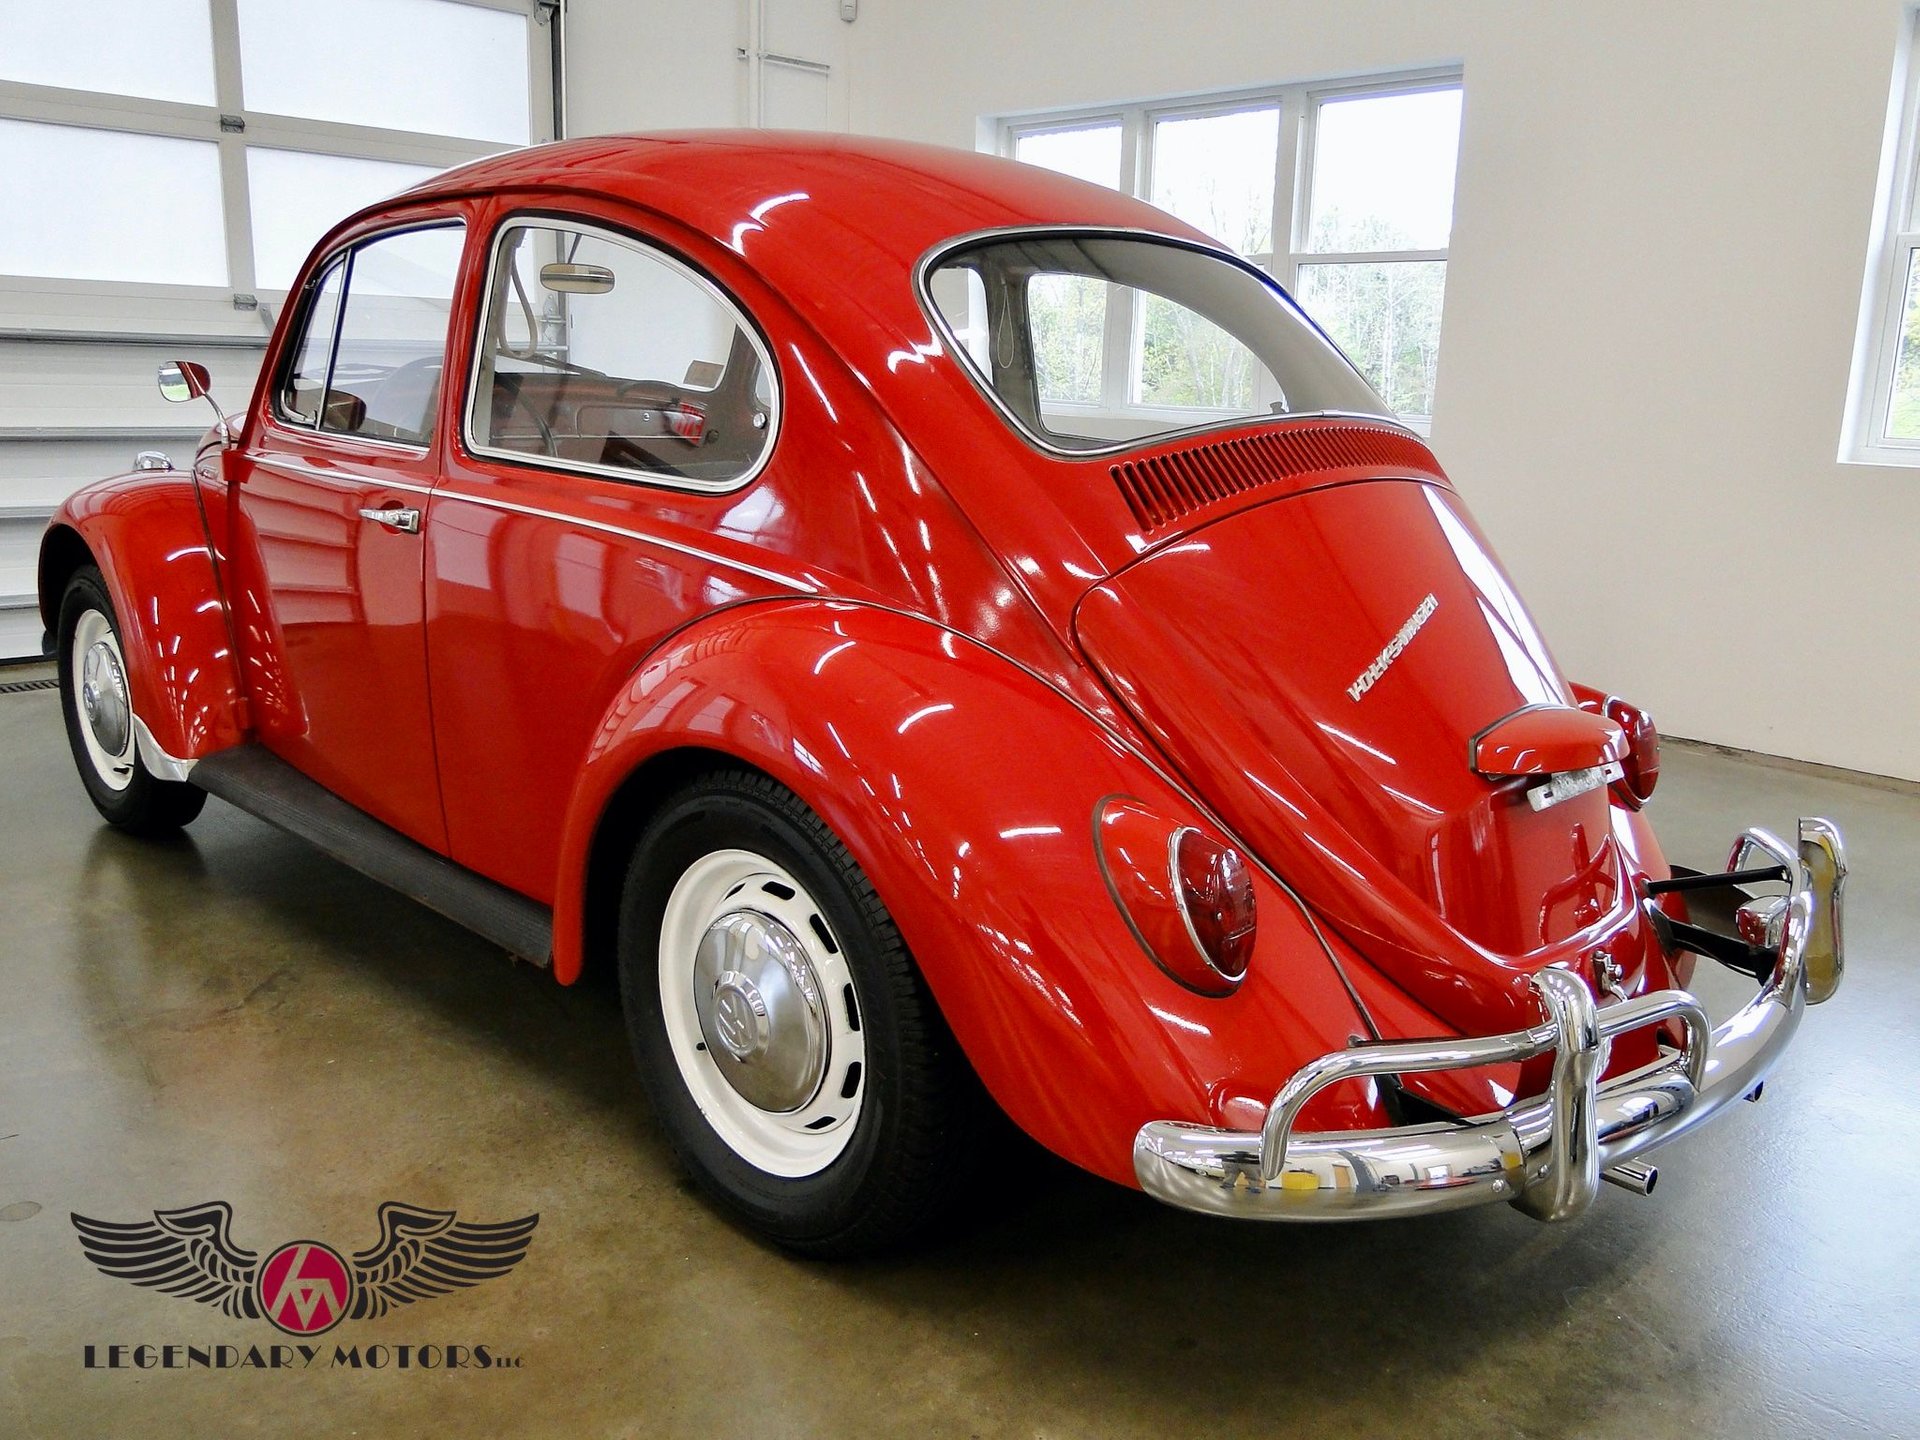 1967 Volkswagen Beetle | Legendary Motors - Classic Cars, Muscle Cars, Hot  Rods & Antique Cars - Rowley, MA